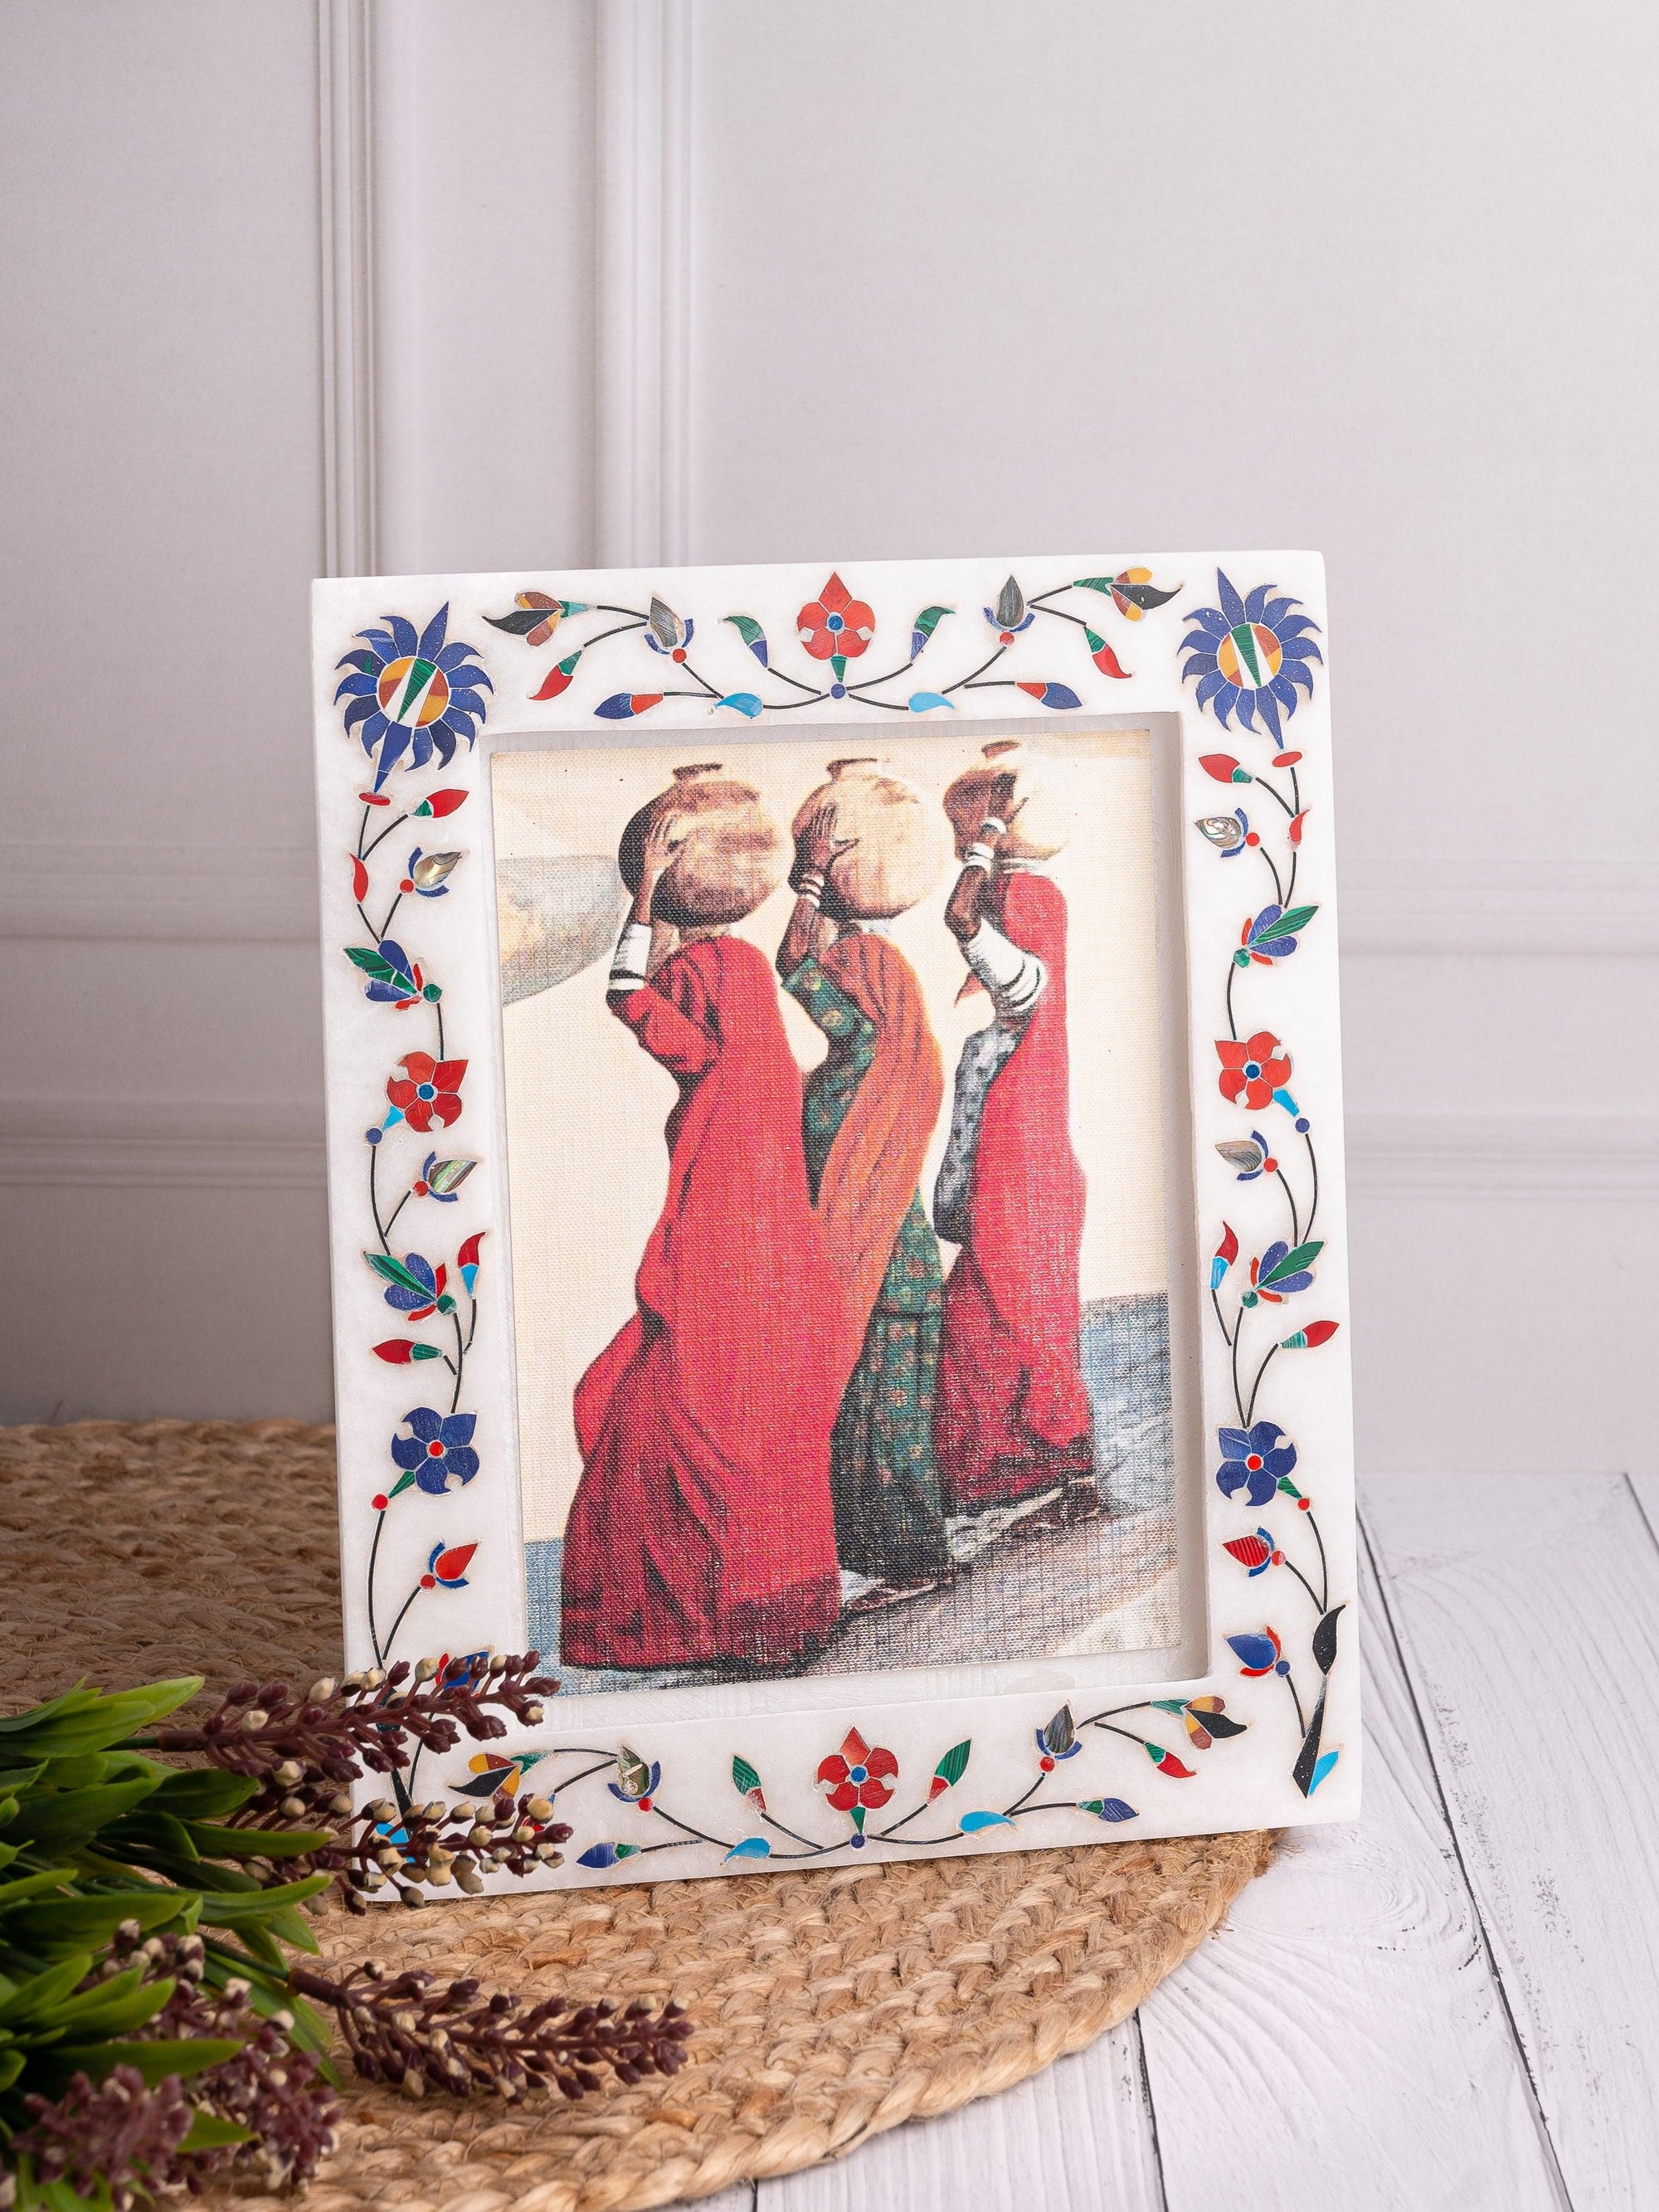 White marble photo / picture frame with inlay work - portrait view - The Heritage Artifacts